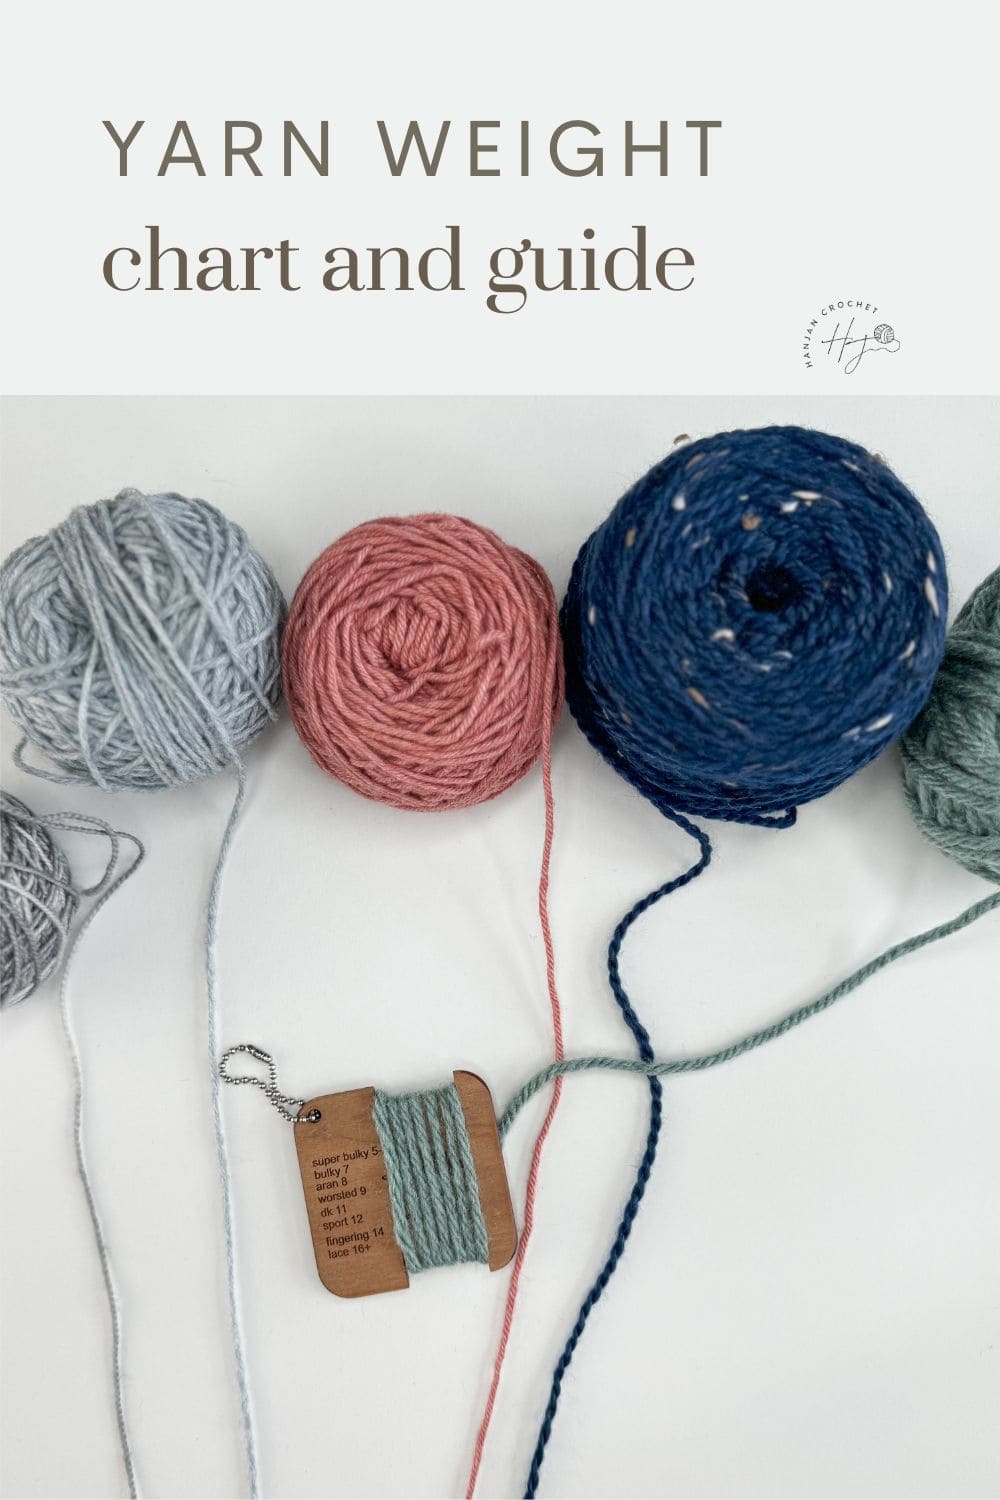 A yarn weight chart and guide, featuring five skeins in diverse colors and textures, displayed with a reference swatch on a wraps per inch tool.